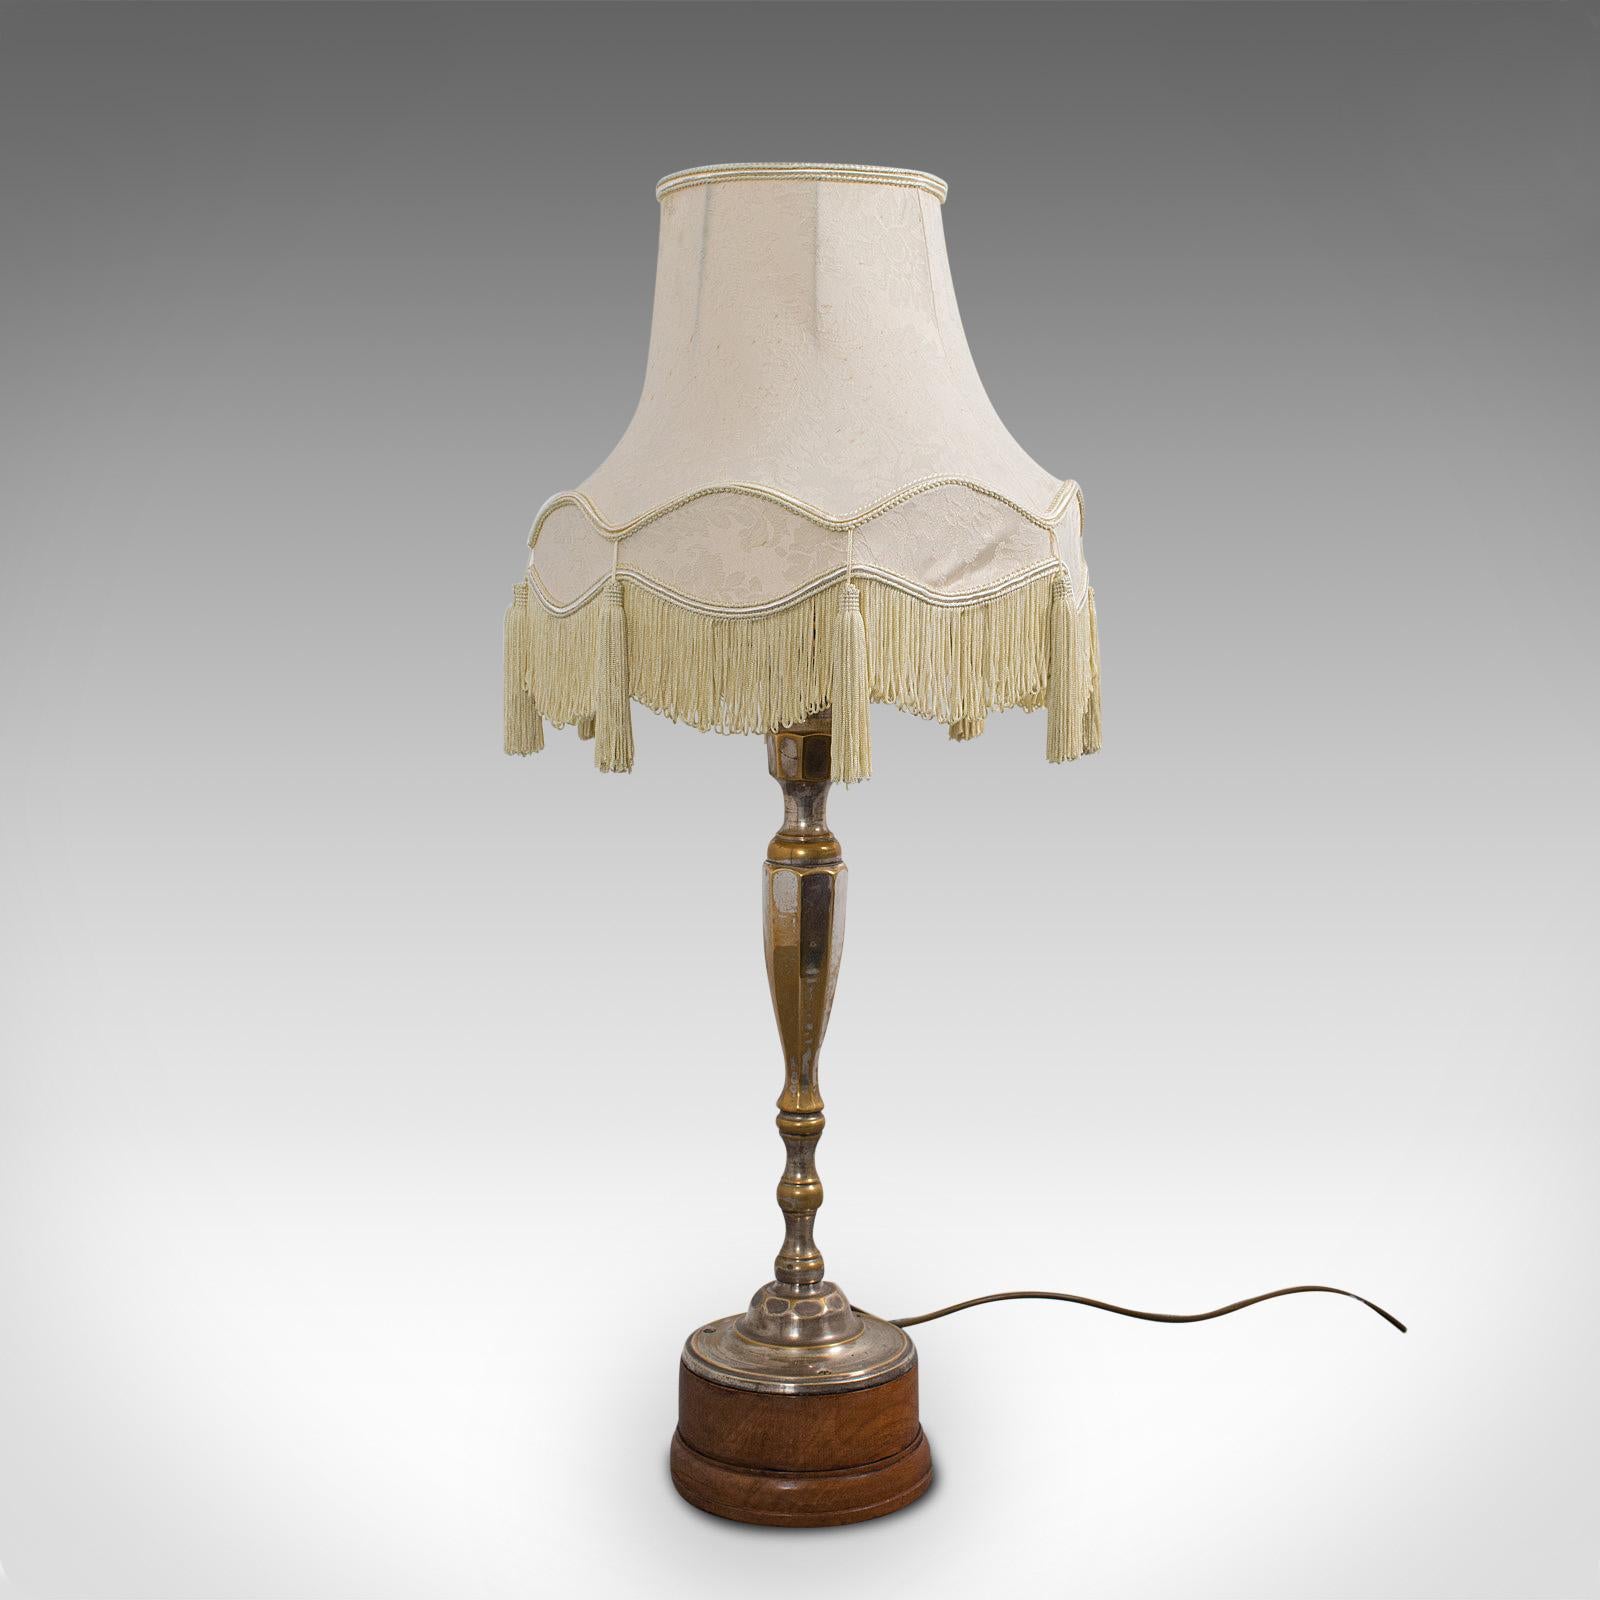 This is a tall vintage table lamp. An English, walnut and silver-plated side or occasional light, dating to the early 20th century, circa 1930.

Add a dash of practical elegance to the corner of the room
Displaying a desirable aged patina -